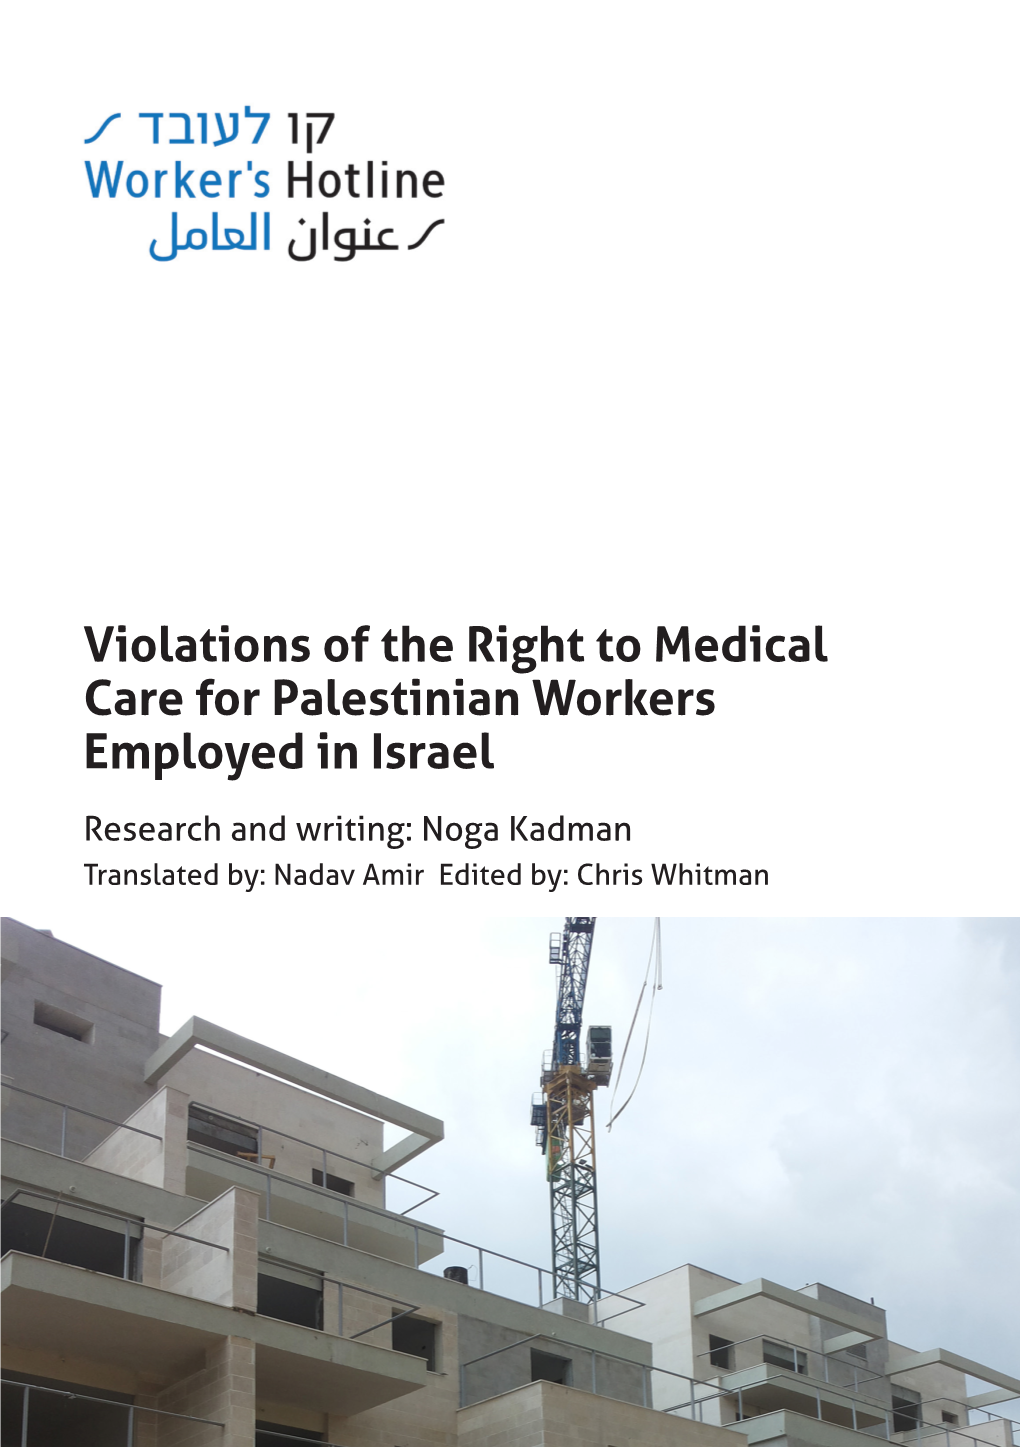 Violations of the Right to Medical Care for Palestinian Workers Employed in Israel